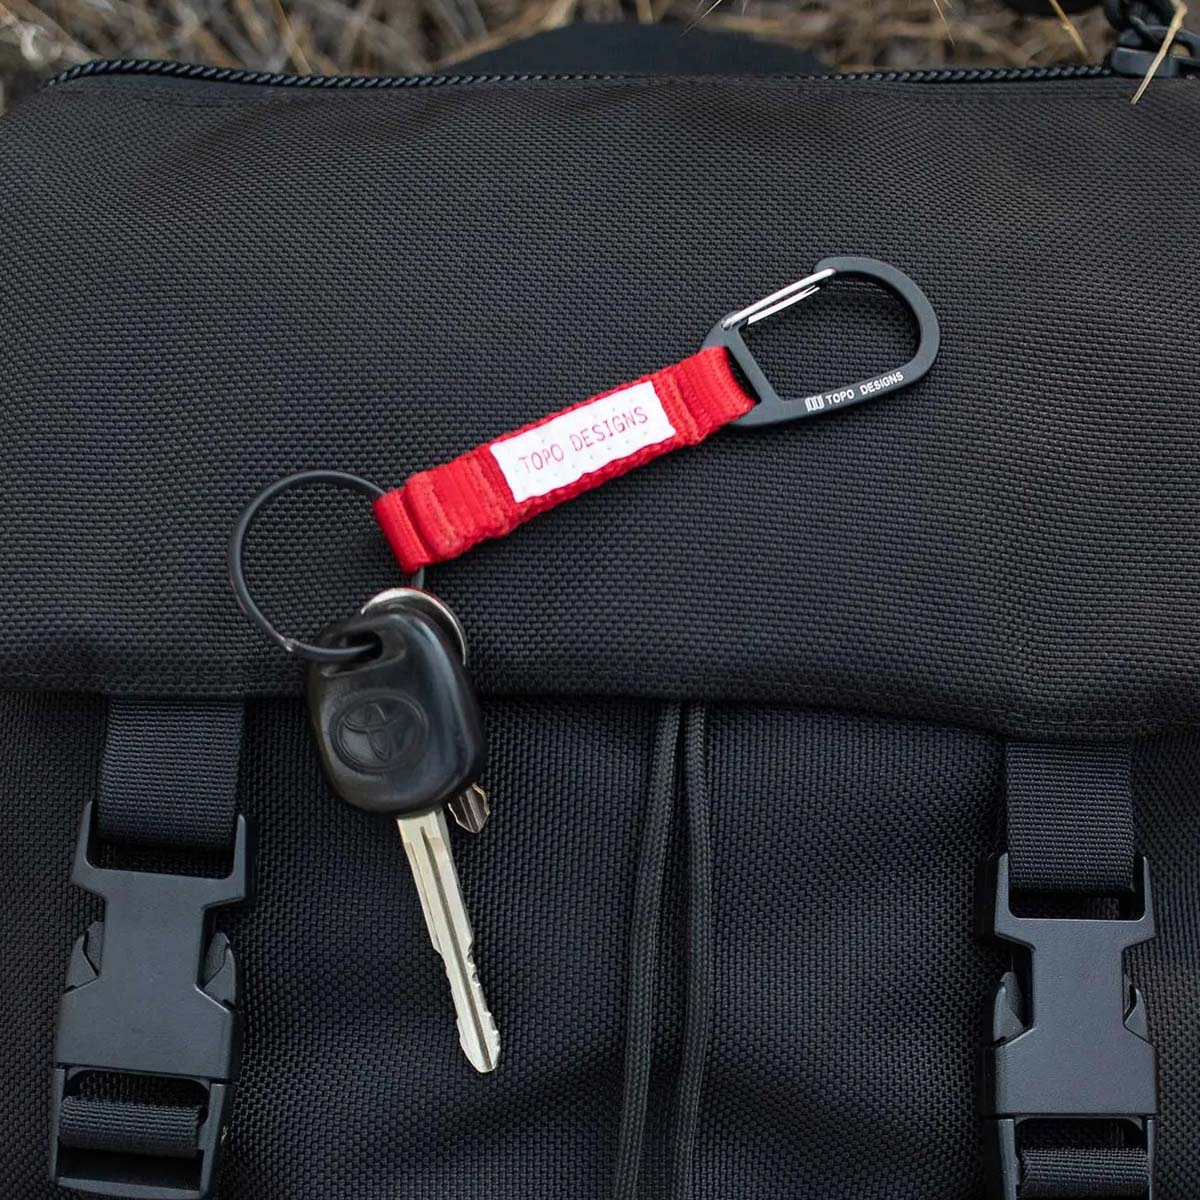 Topo Designs Key Clip Red, keep keys handy and visible with the Key Clip